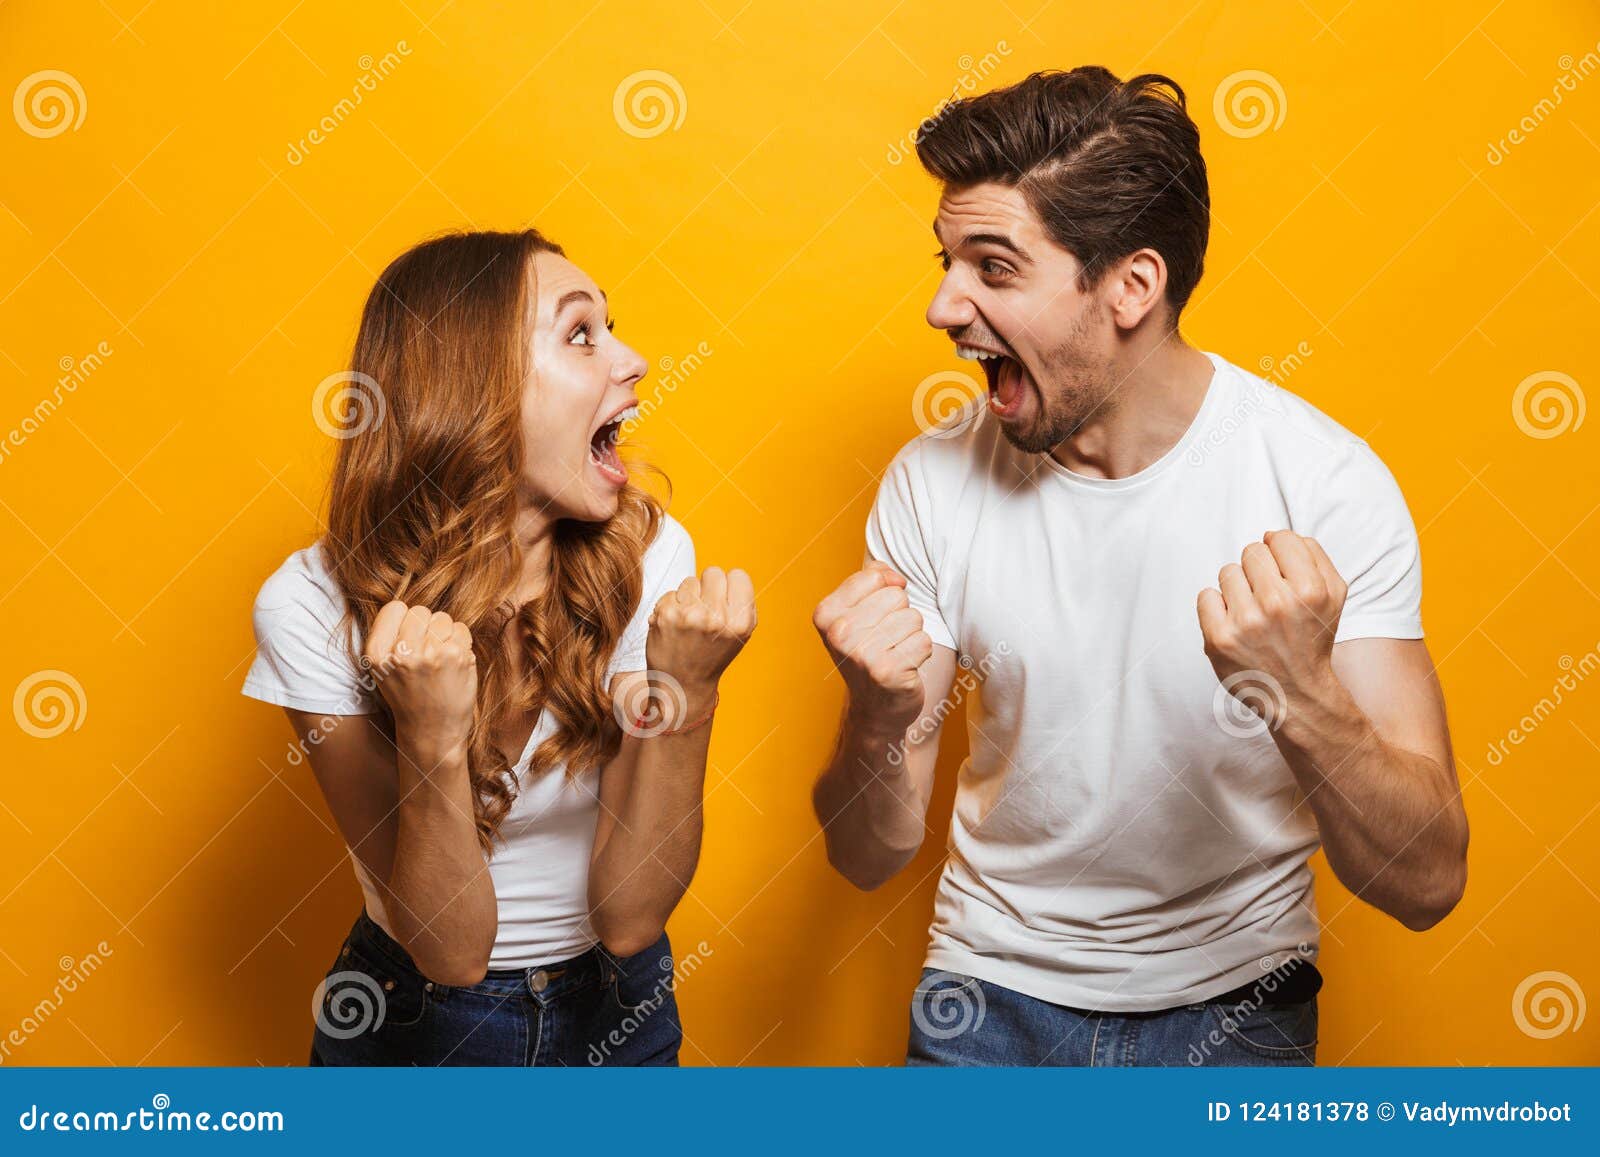 photo of delighted european man and woman in basic clothing screaming and clenching fists like winners or happy people, 